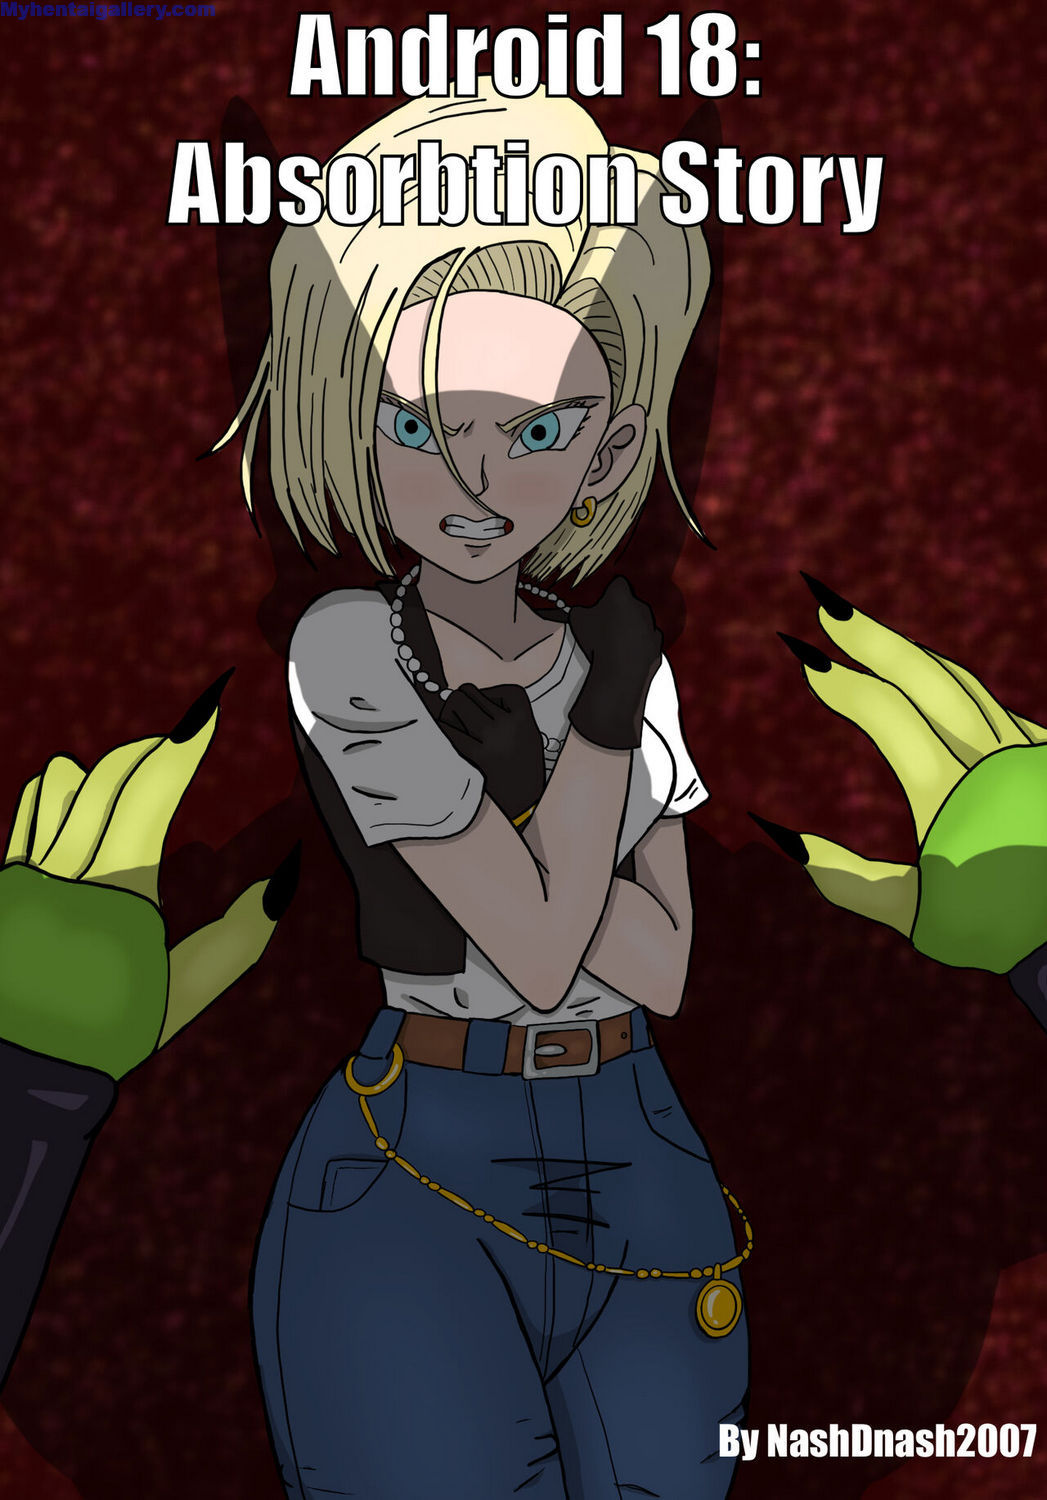 Android 18 - Absorption Story